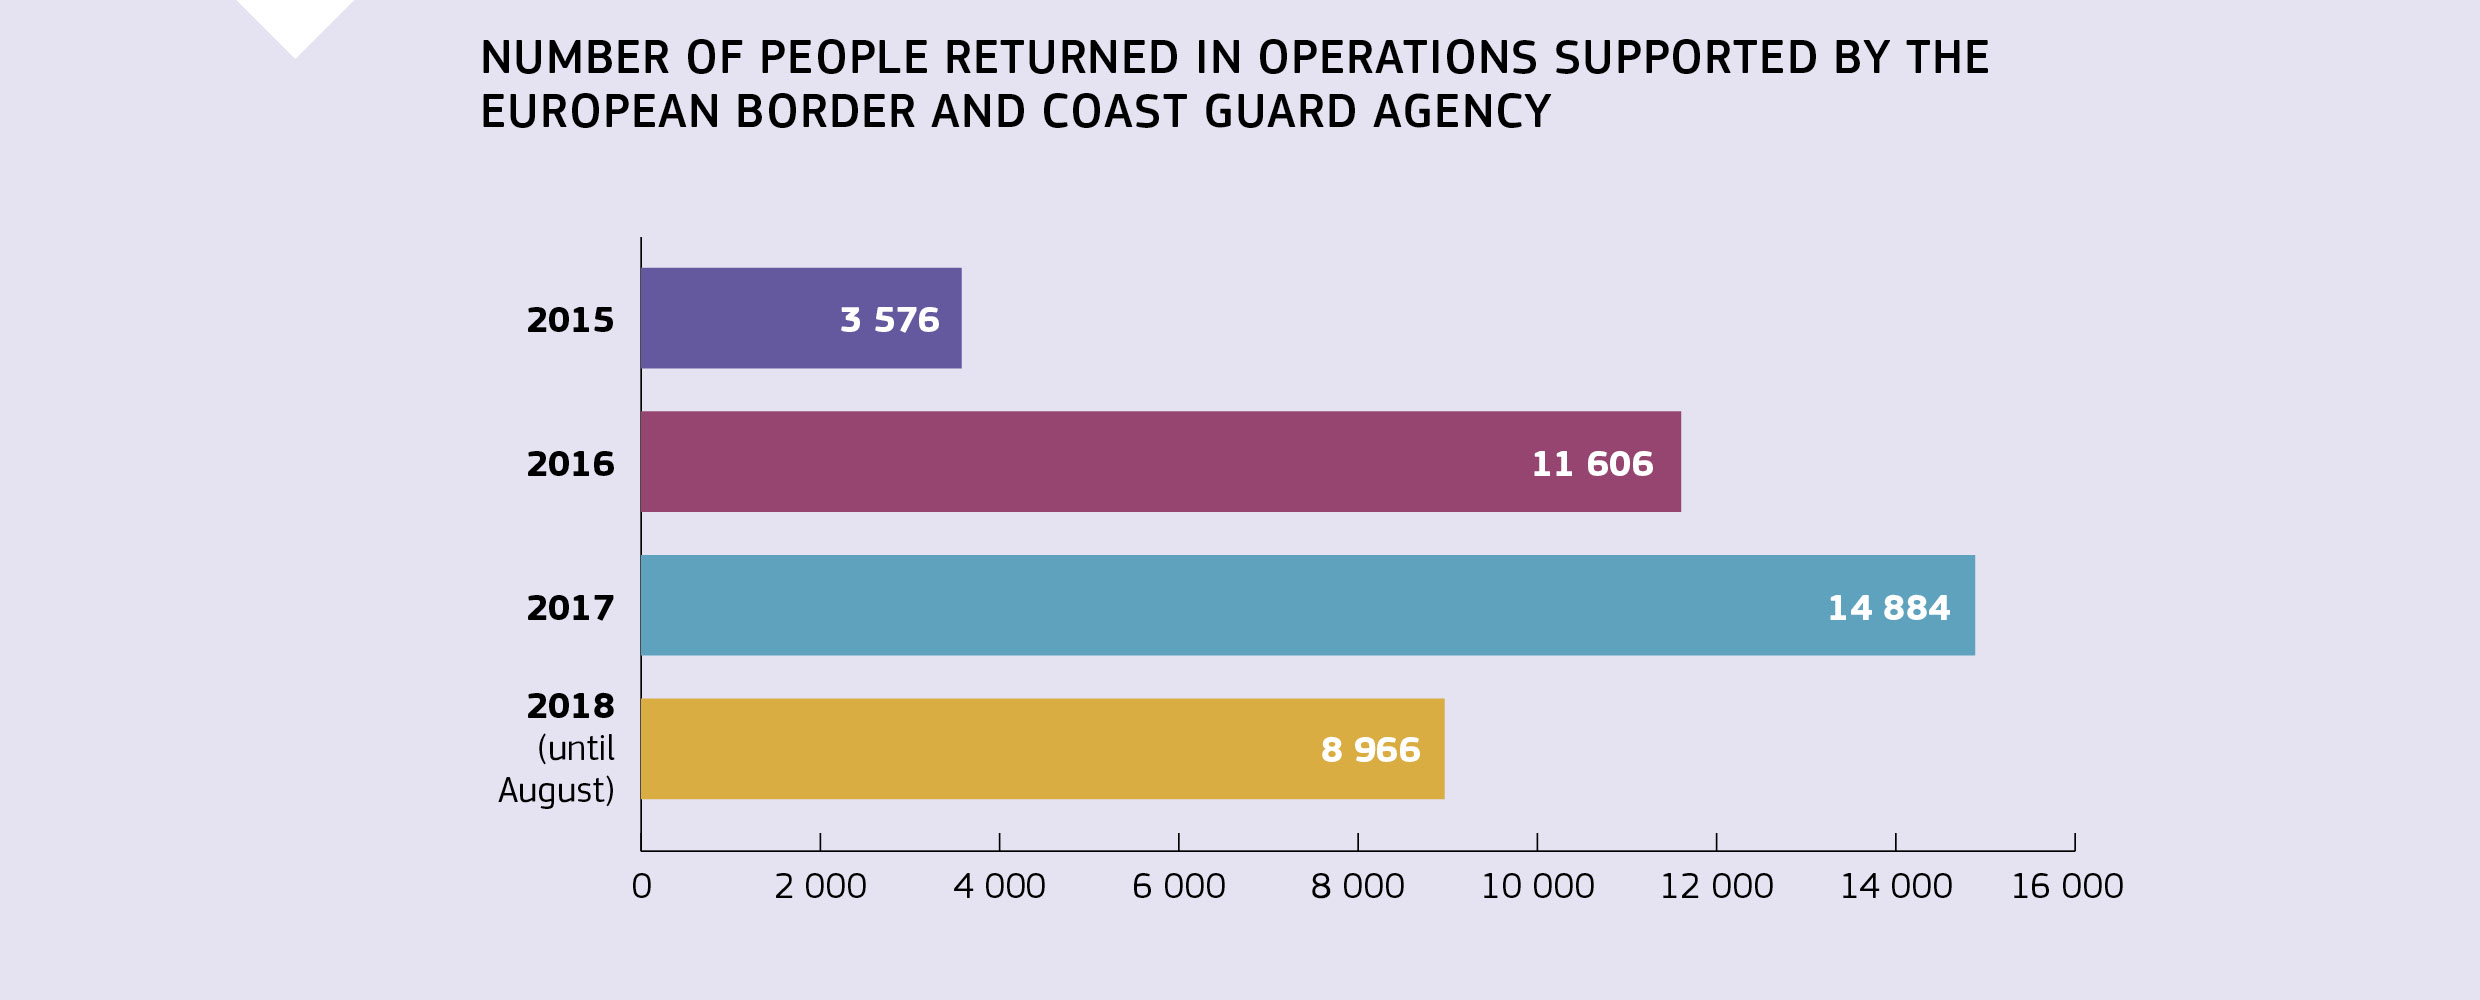 NUMBER OF PEOPLE RETURNED IN OPERATIONS SUPPORTED BY THE EUROPEAN BORDER AND COAST GUARD AGENCY